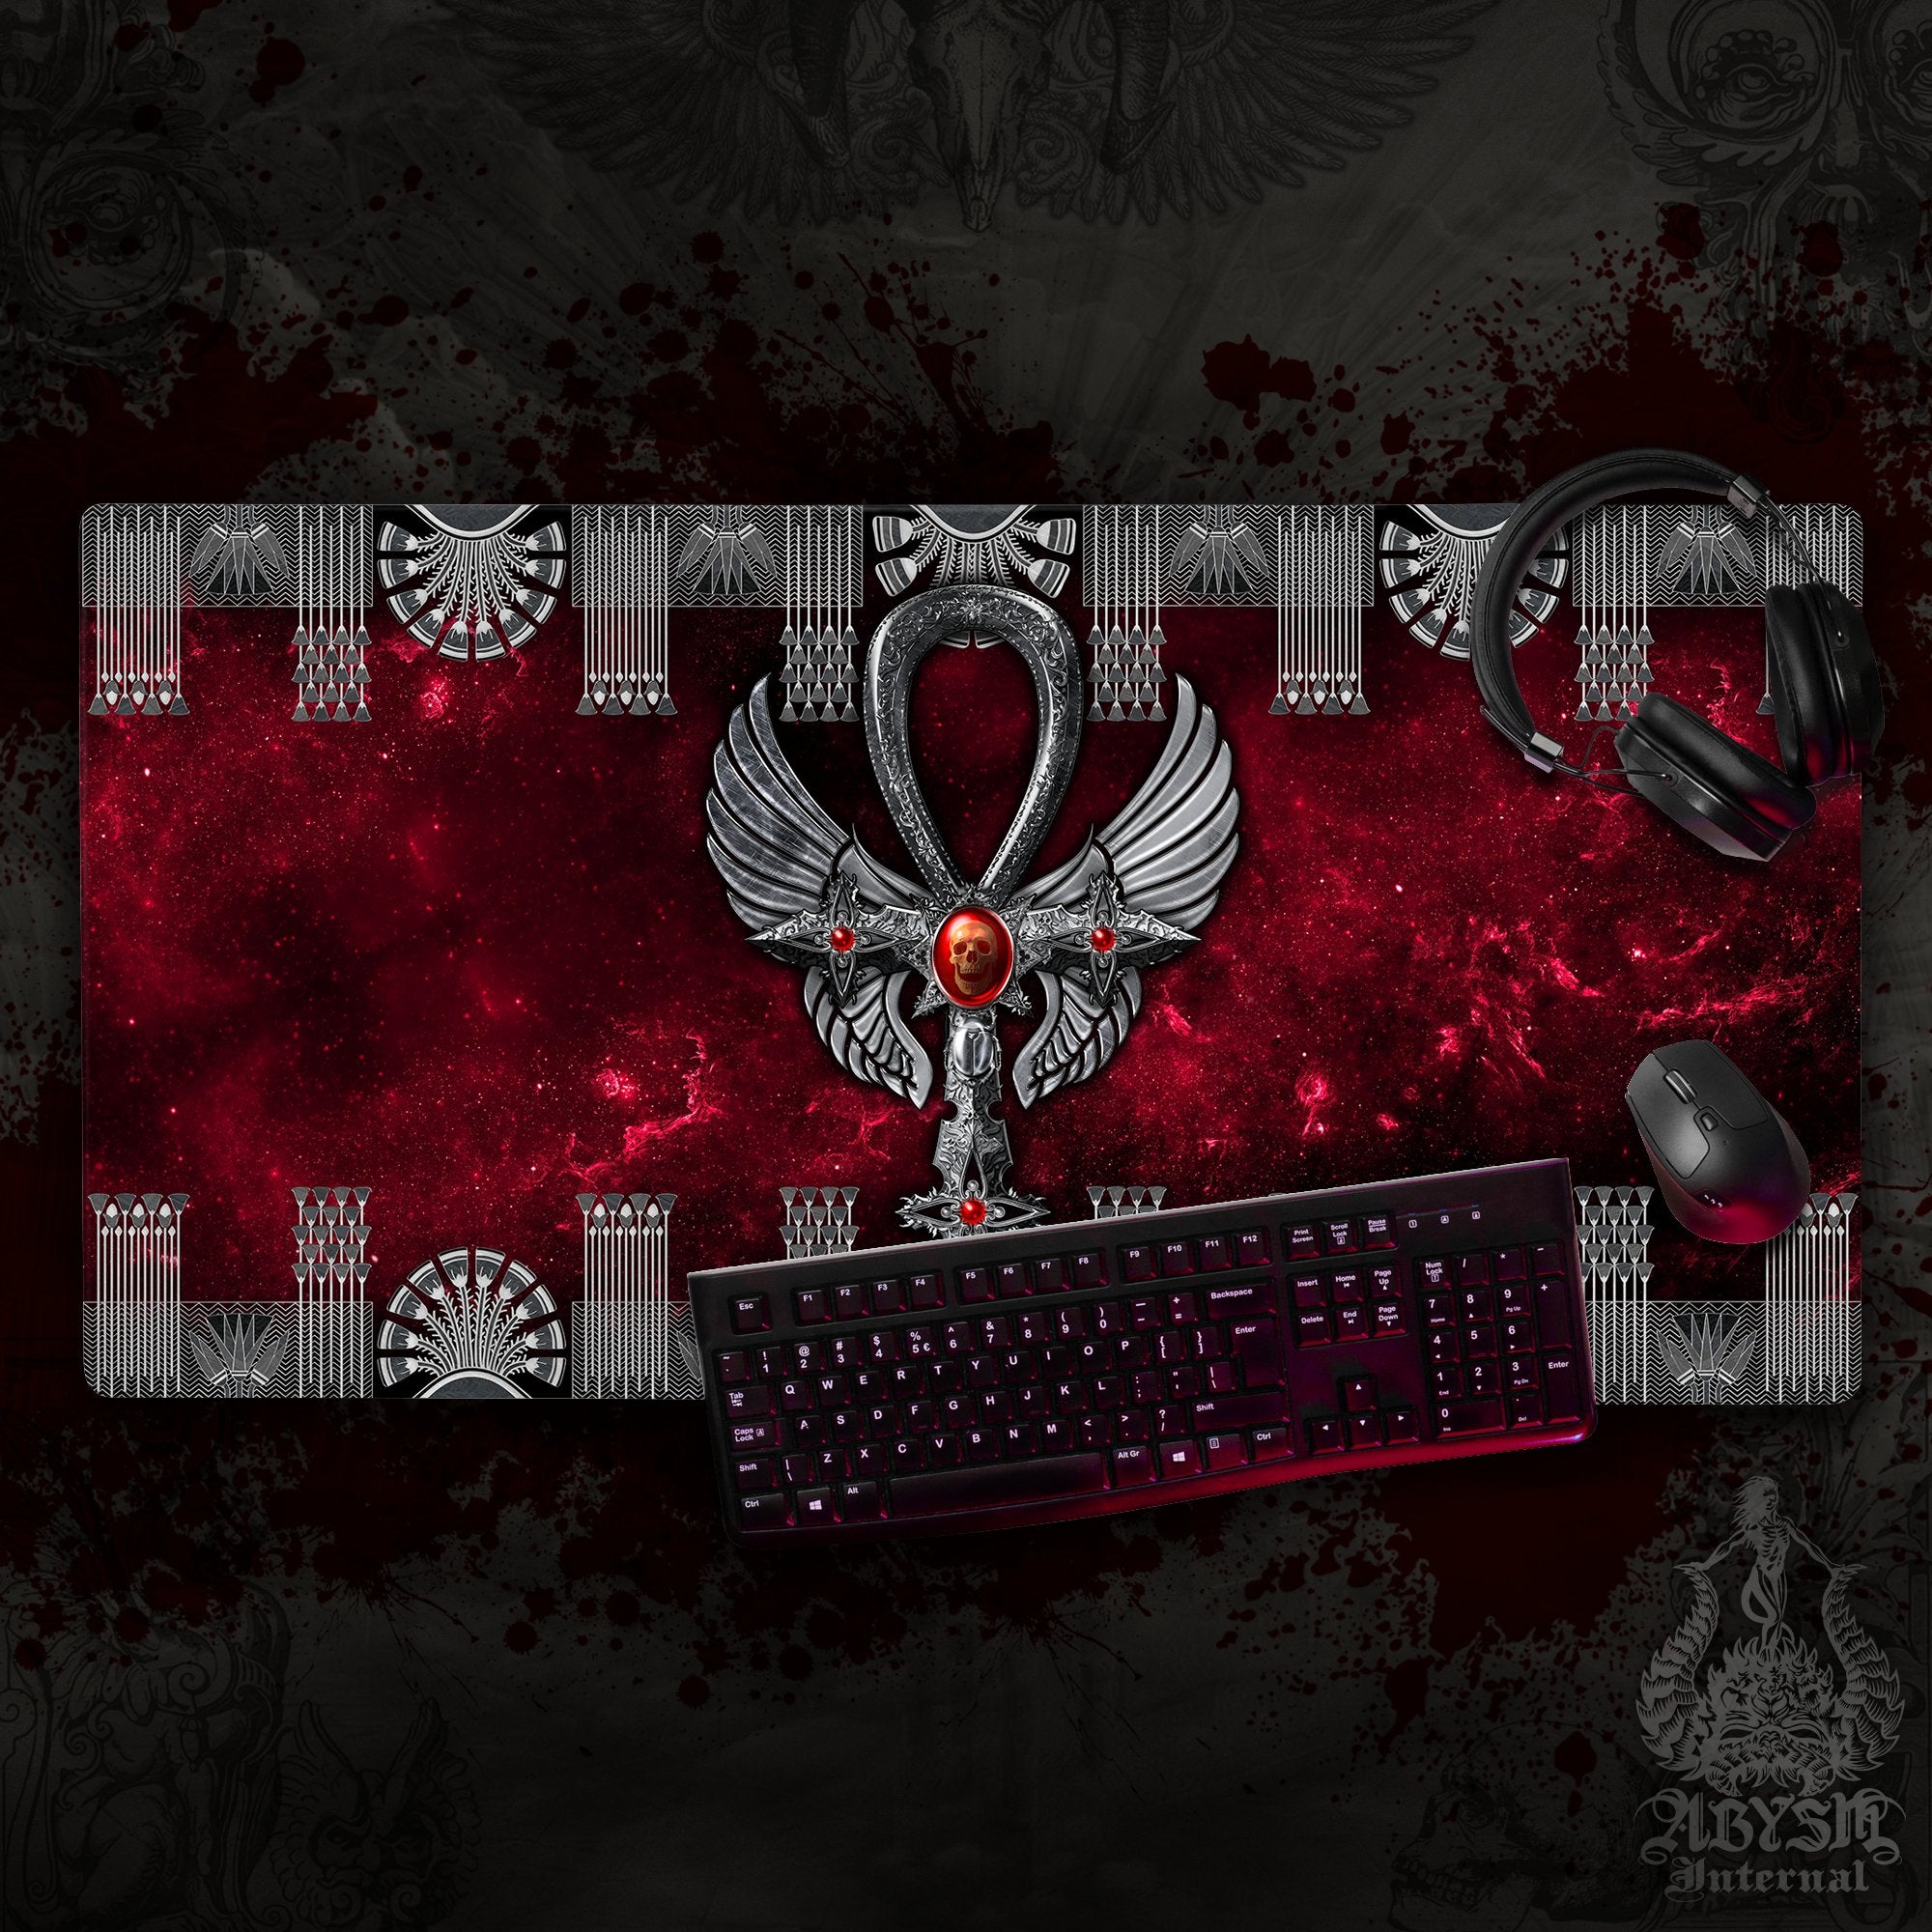 Goth Mouse Pad, Gothic Gaming Desk Mat, Silver Ankh Table Protector Cover, Egyptian Workpad, Dark Art Print - 2 Colors - Abysm Internal